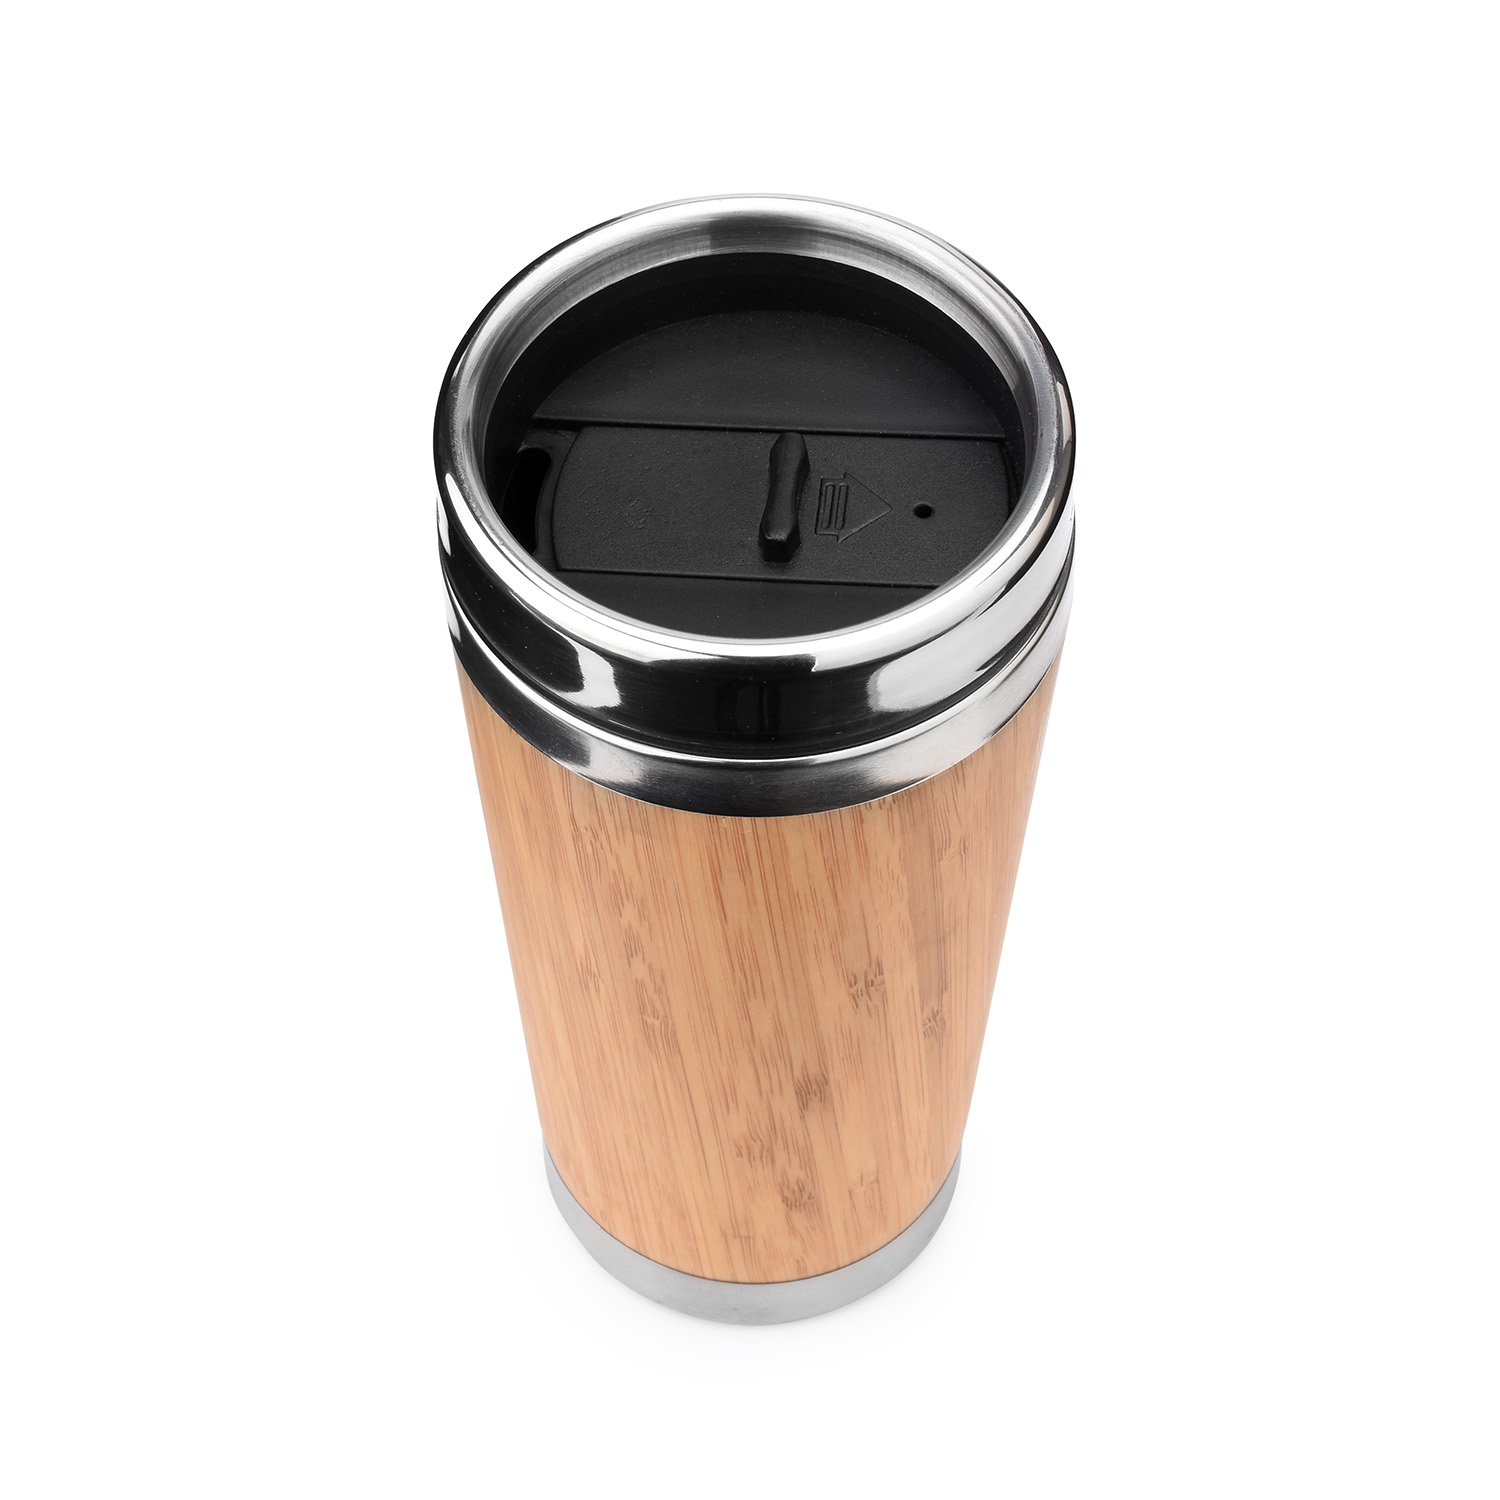 https://www.waterbottle.tech/wp-content/uploads/2019/06/bamboo-insulated-stainless-steel-travel-mug-s24450a8-2.jpg